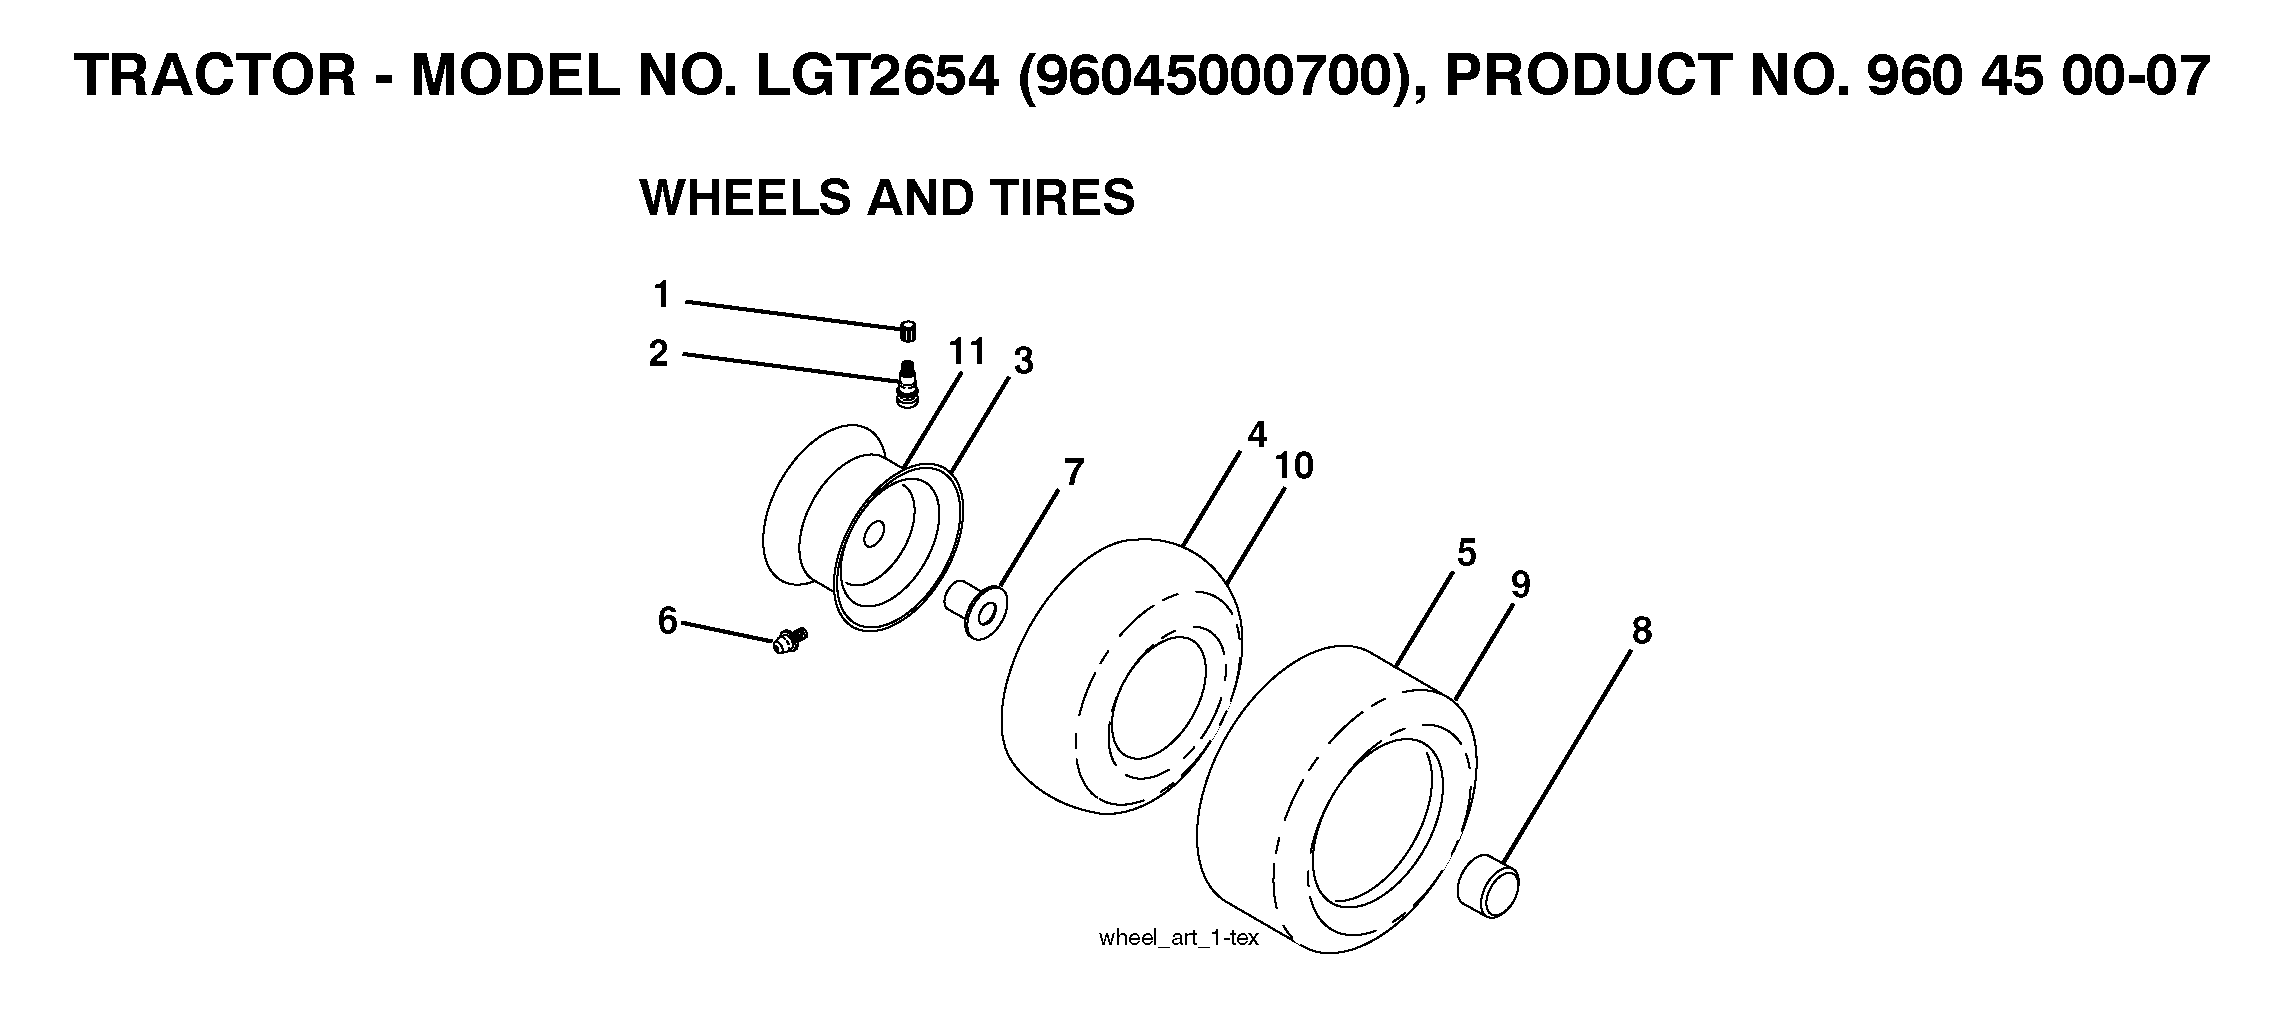 Wheels and tires 532059192, 532065139, 532148736, 532059904, 532106230, 532000278, 532009040, 532104757, 532184708, 532007152, 532401782, 576707201